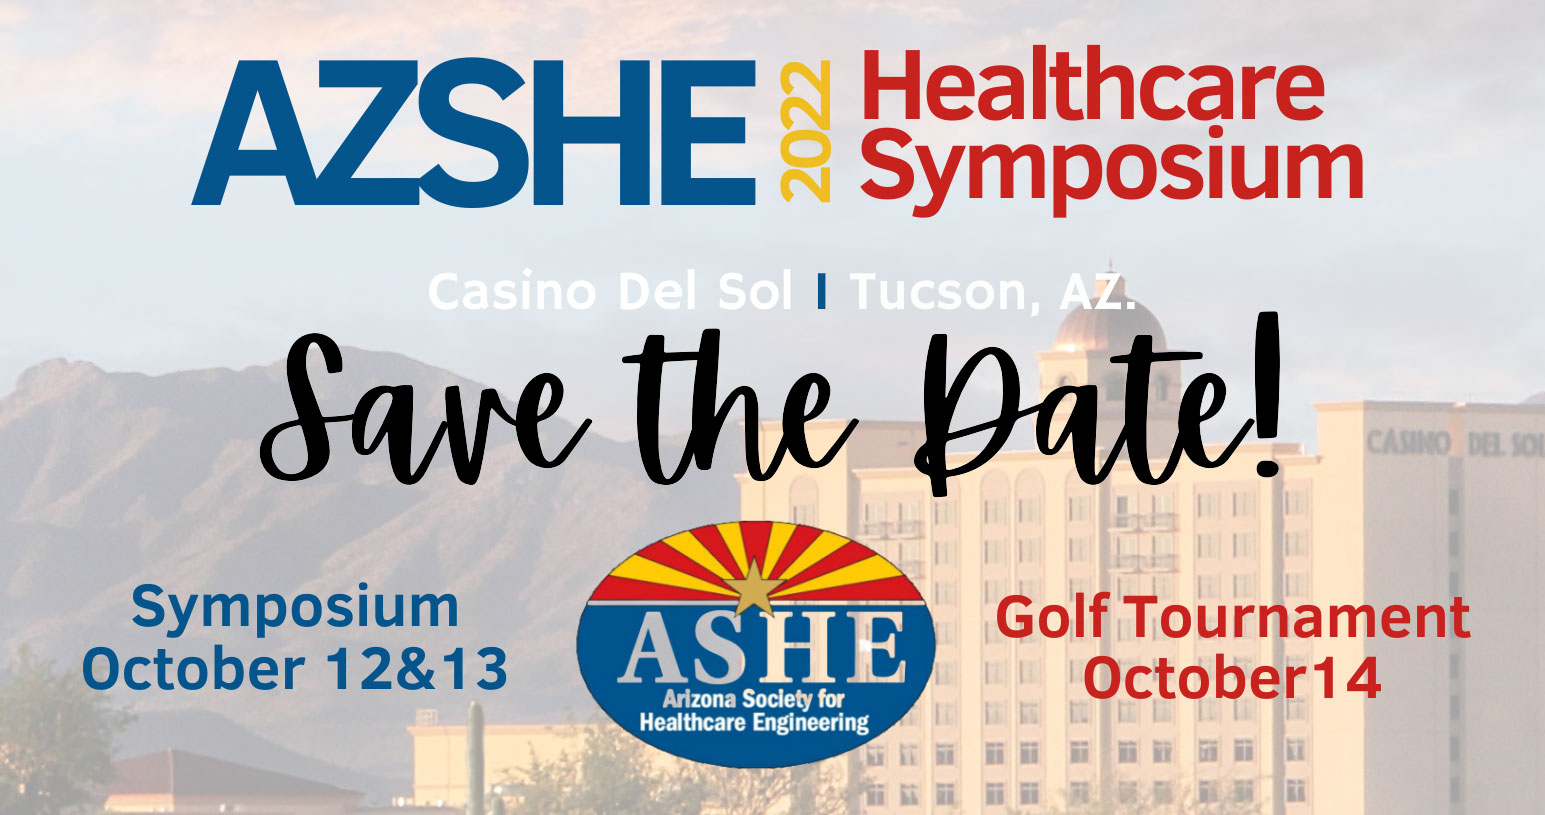 You are currently viewing AZSHE Healthcare Symposium 2022 Oct. 12-13